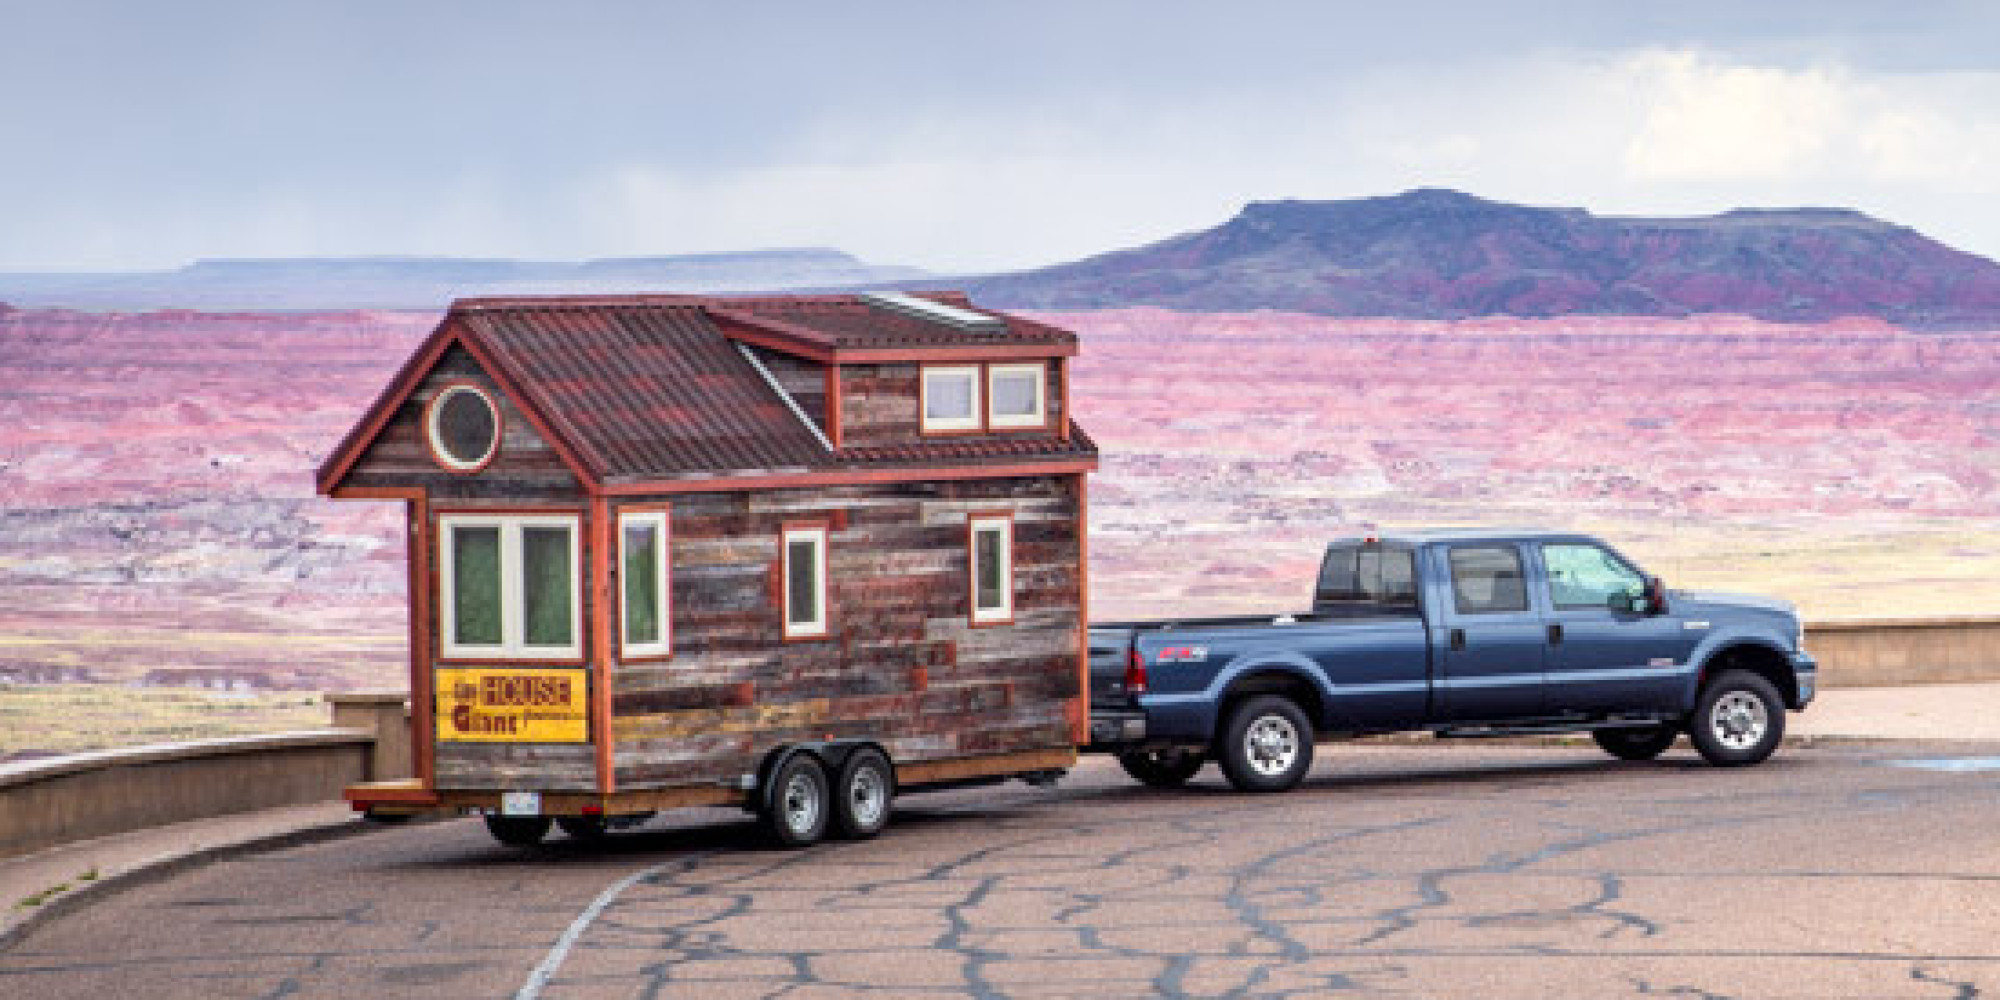 couple quits day jobs, builds quaint, tiny home on wheels